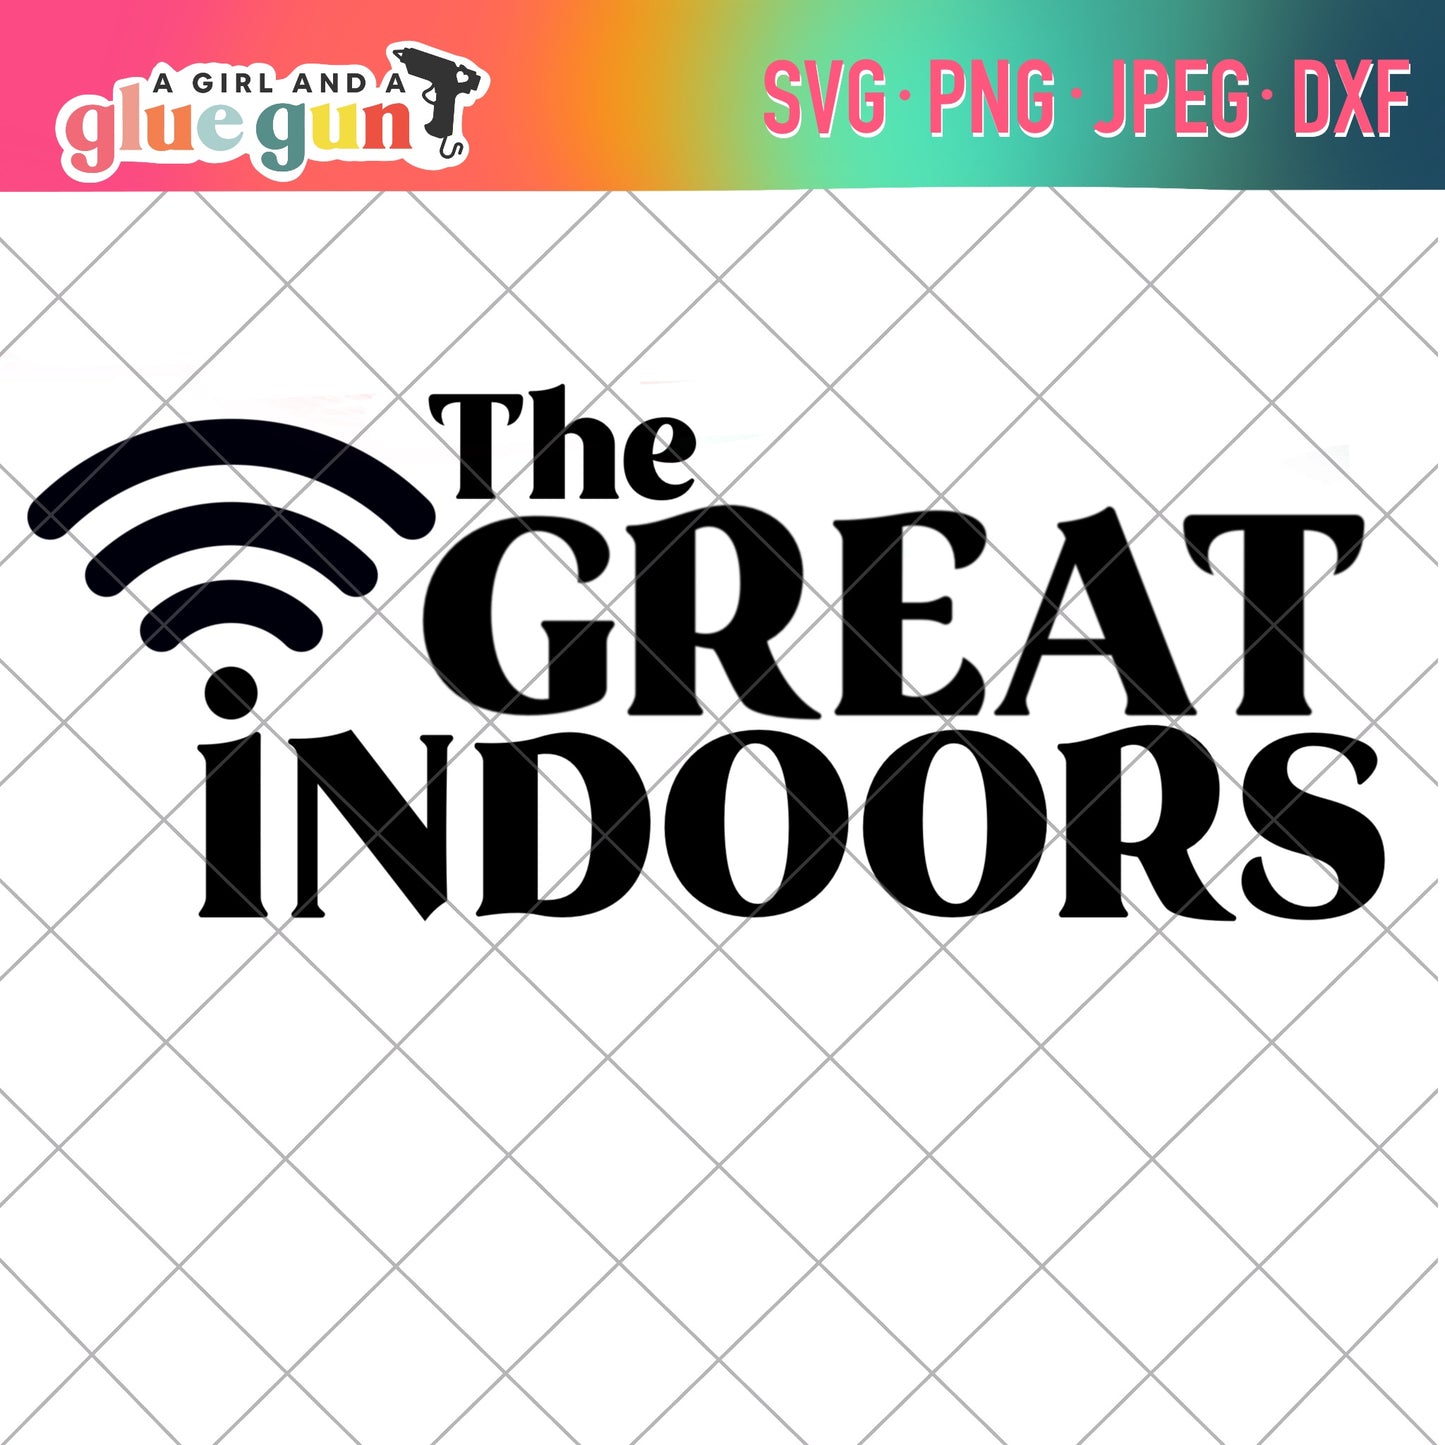 The Great indoors SVG cut file